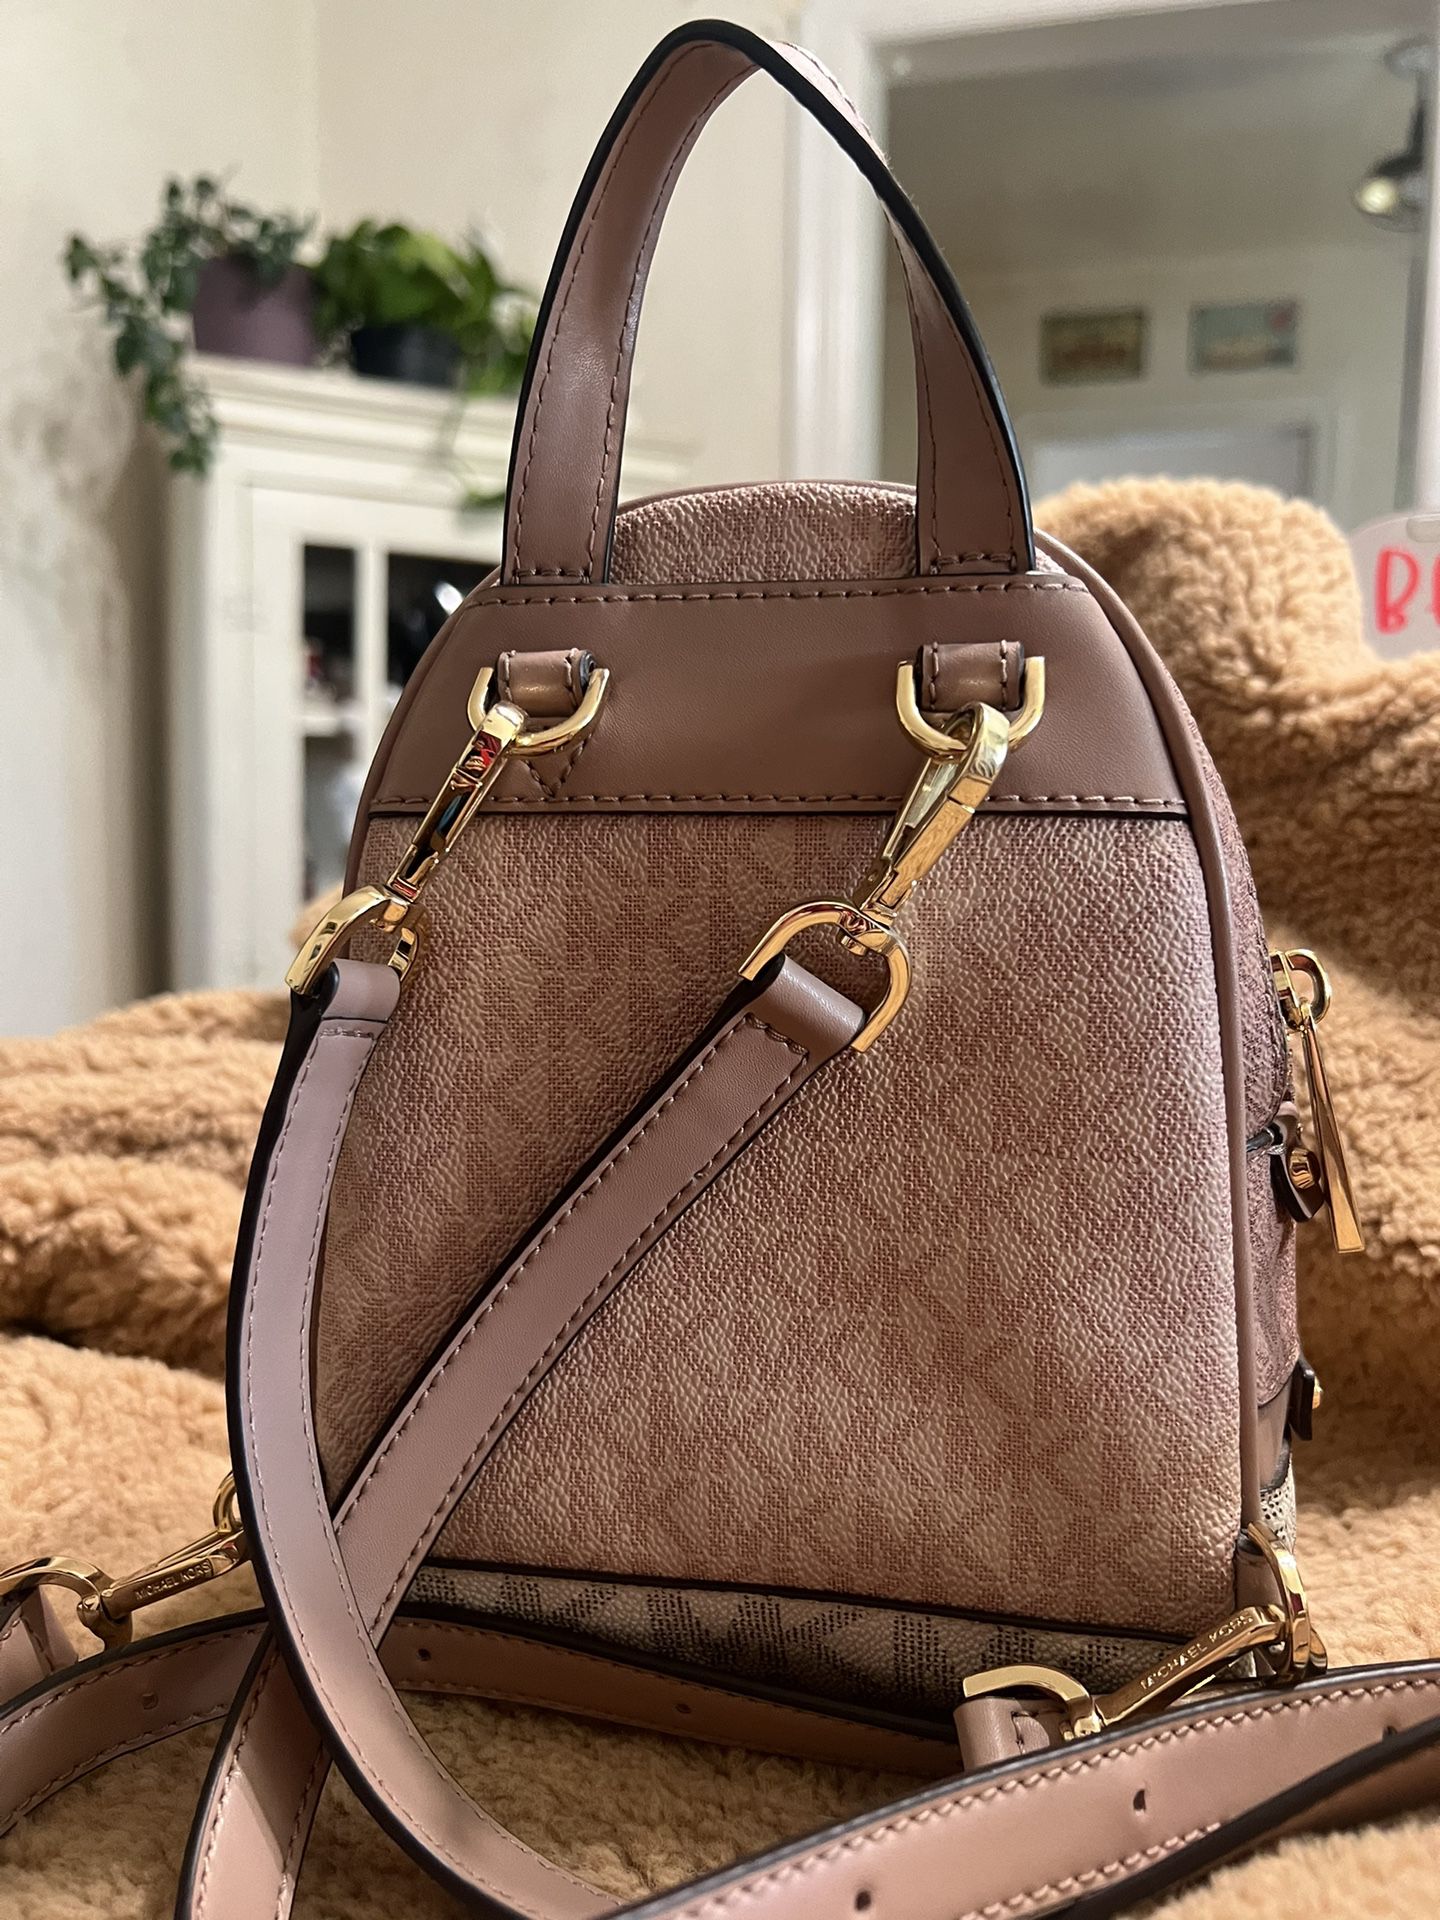 Pink Michael Kors Backpack for Sale in Lathrop, CA - OfferUp